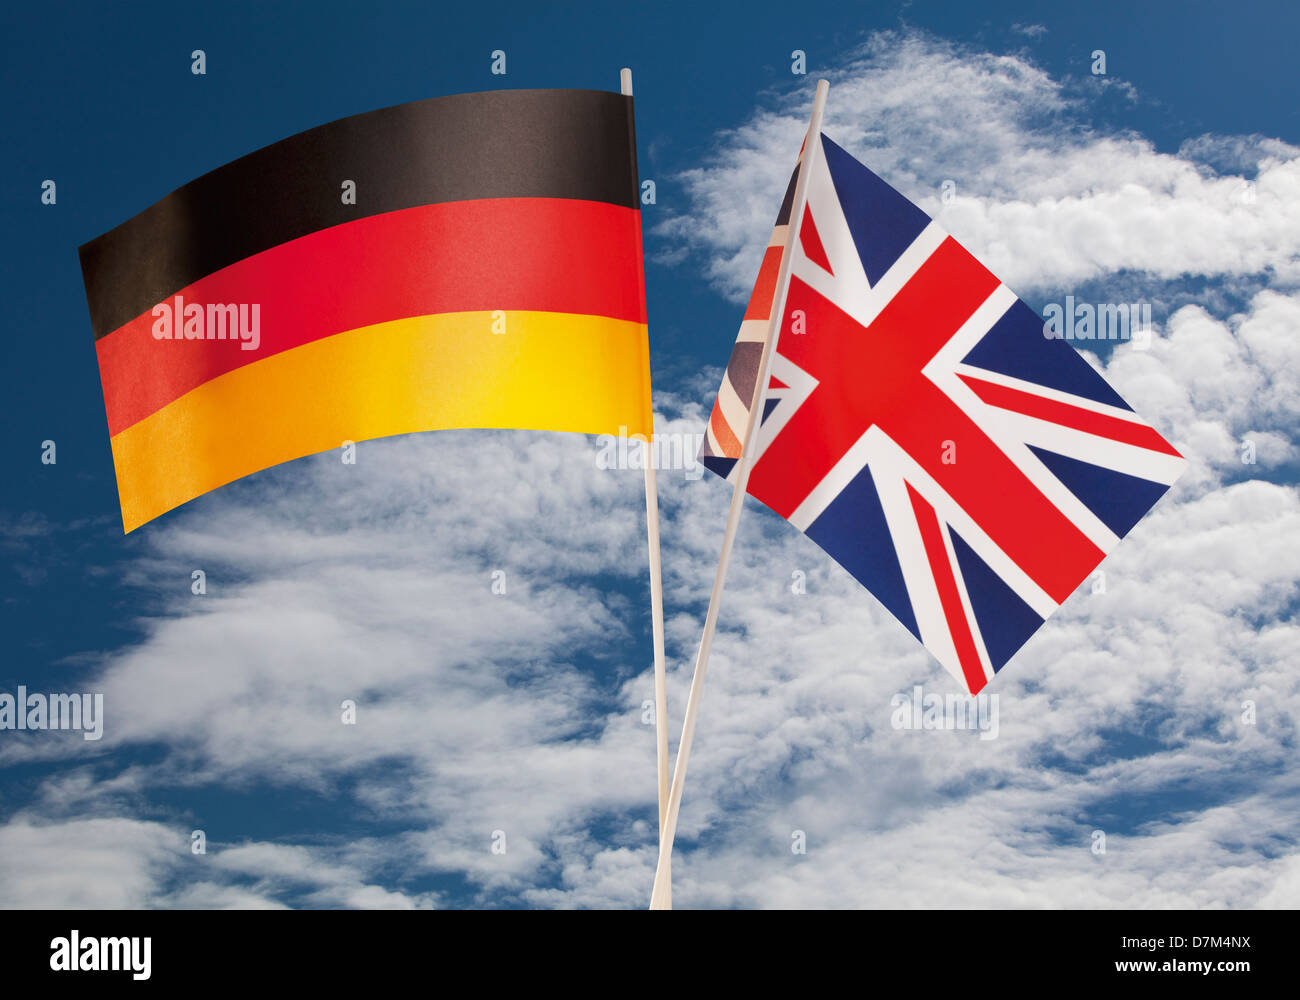 English flag and German flag against cloudy sky Stock Photo